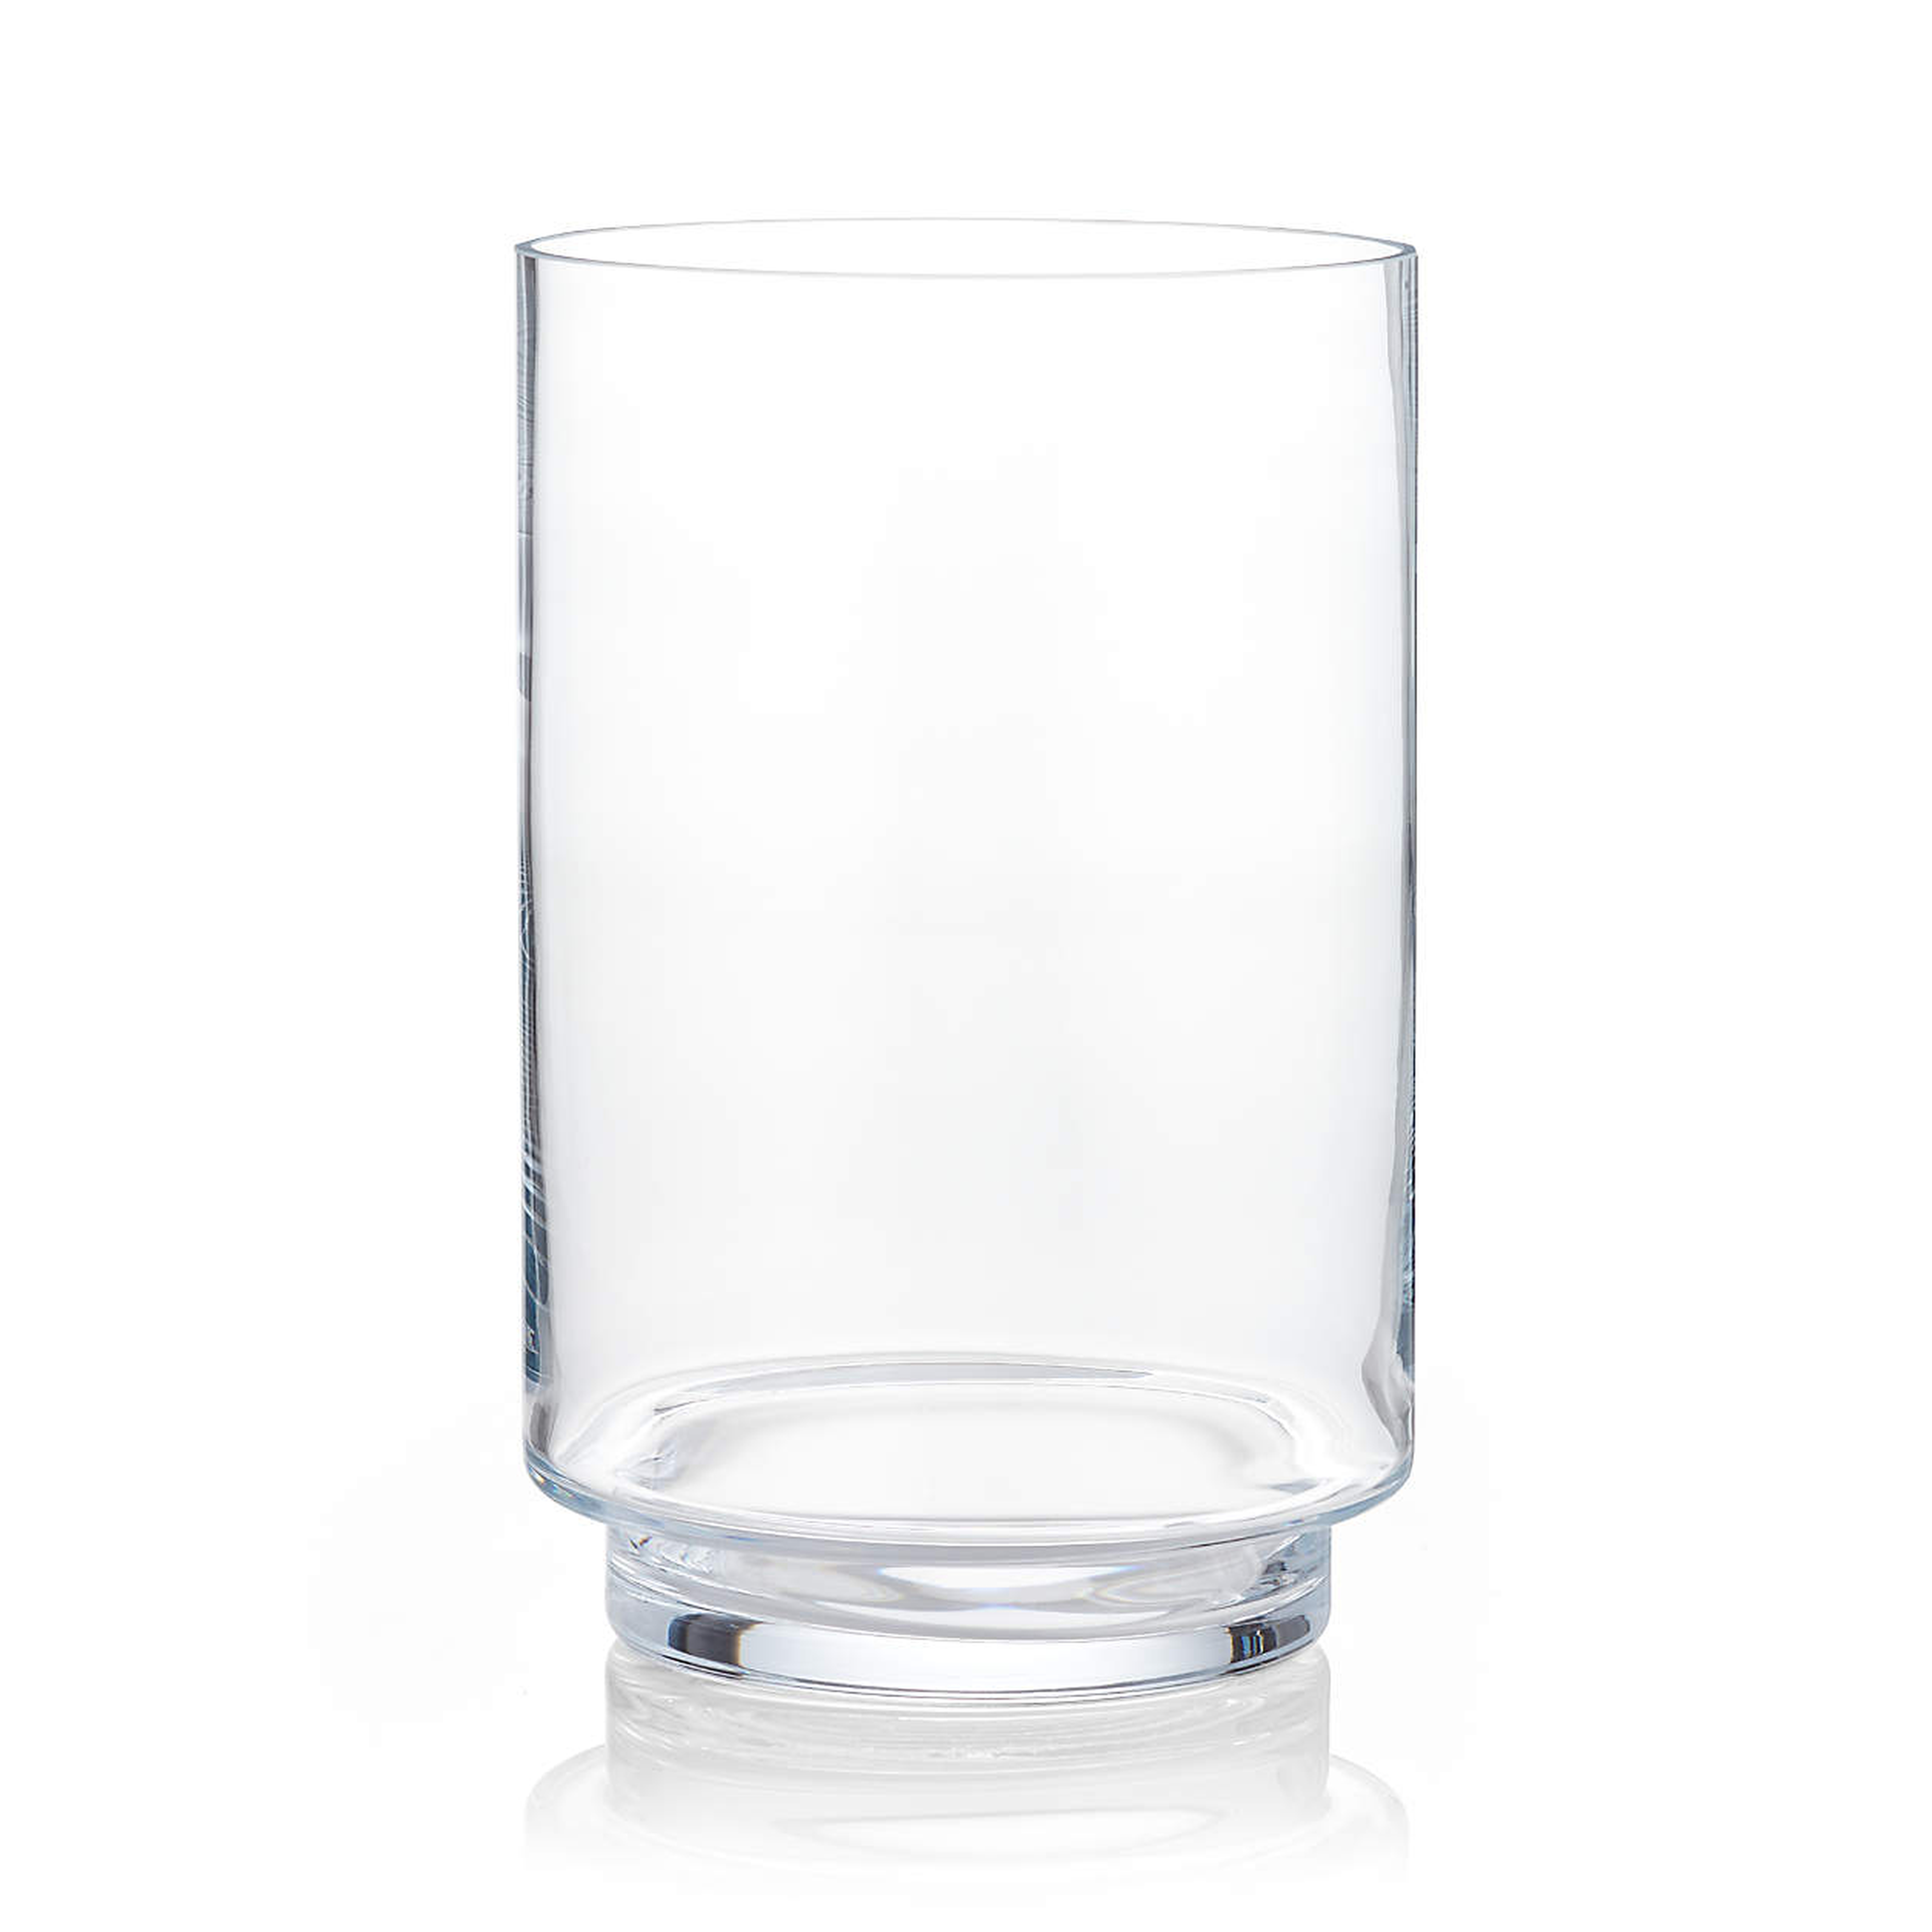 Taylor Hurricane Candle Holder 14" - Crate and Barrel